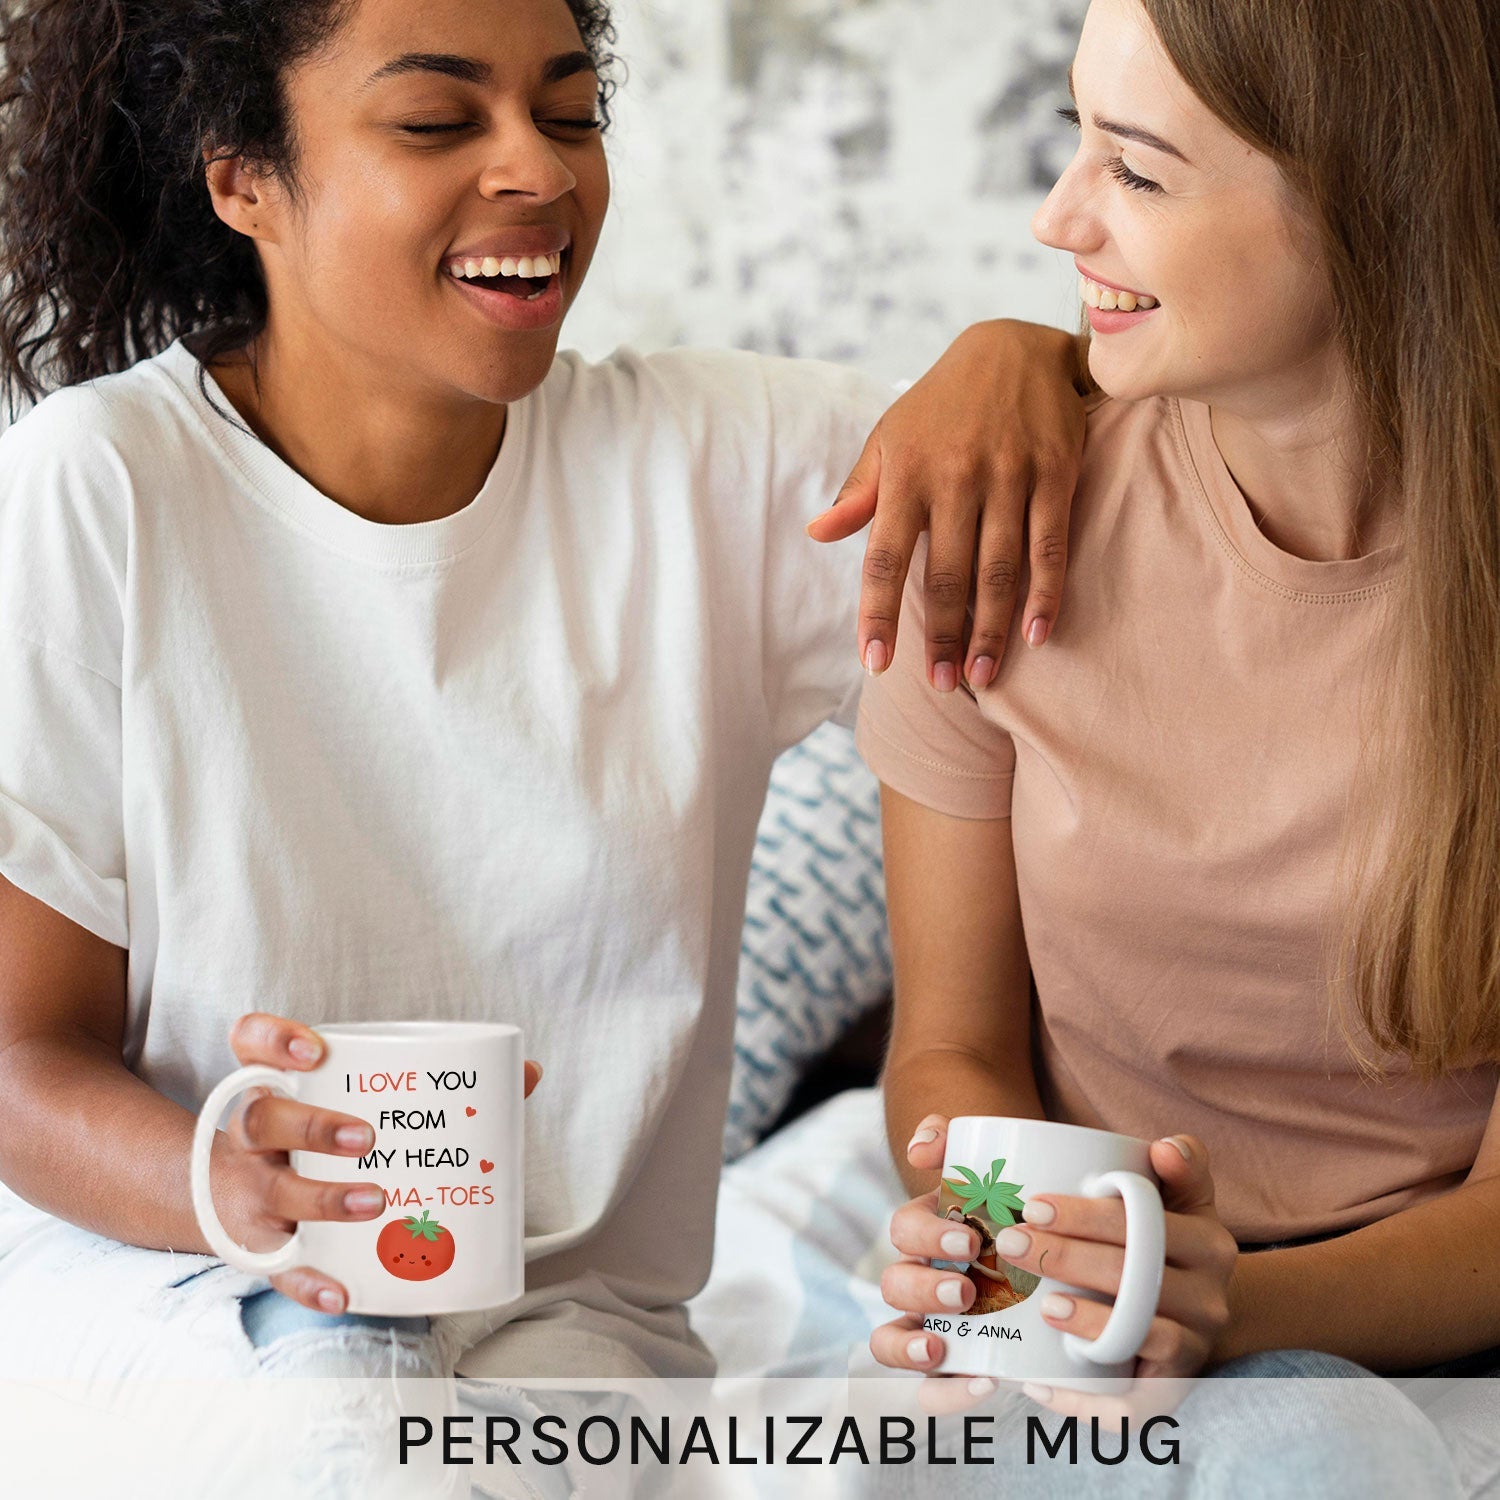 I Love You From My Head To-ma-toes - Personalized Anniversary, Valentine's Day, Birthday or Christmas gift For Him or Her - Custom Mug - MyMindfulGifts